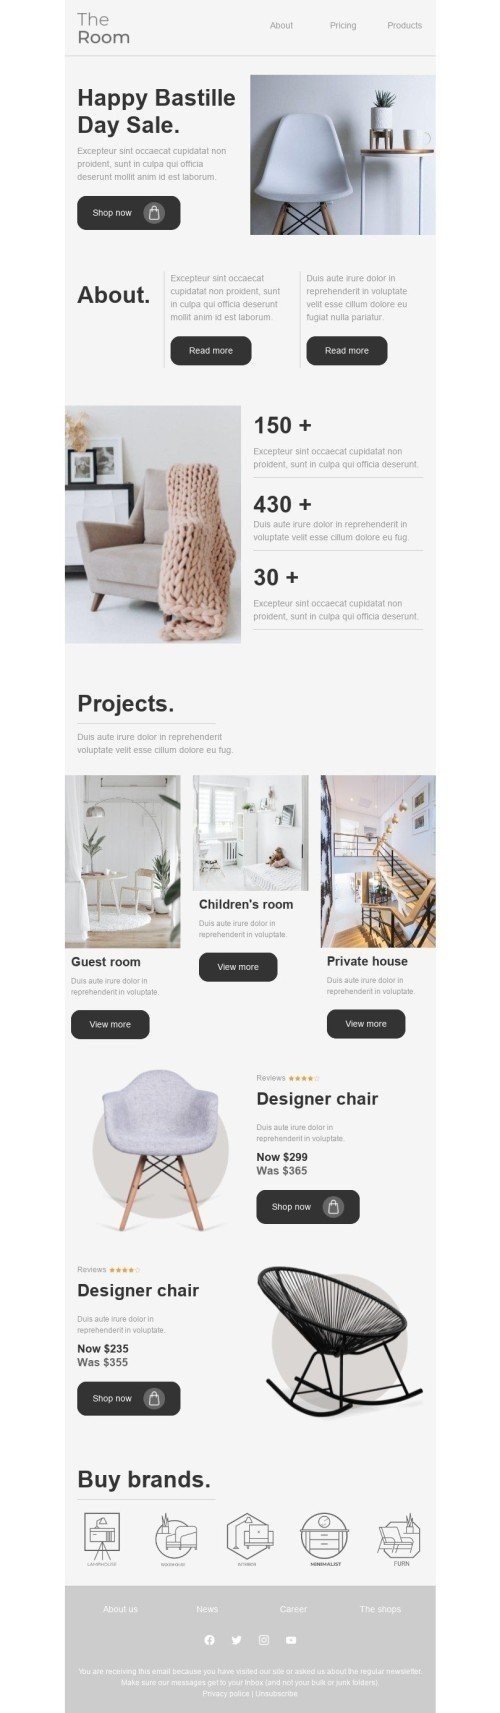 Bastille Day Email Template "The Room" for Furniture, Interior & DIY industry mobile view